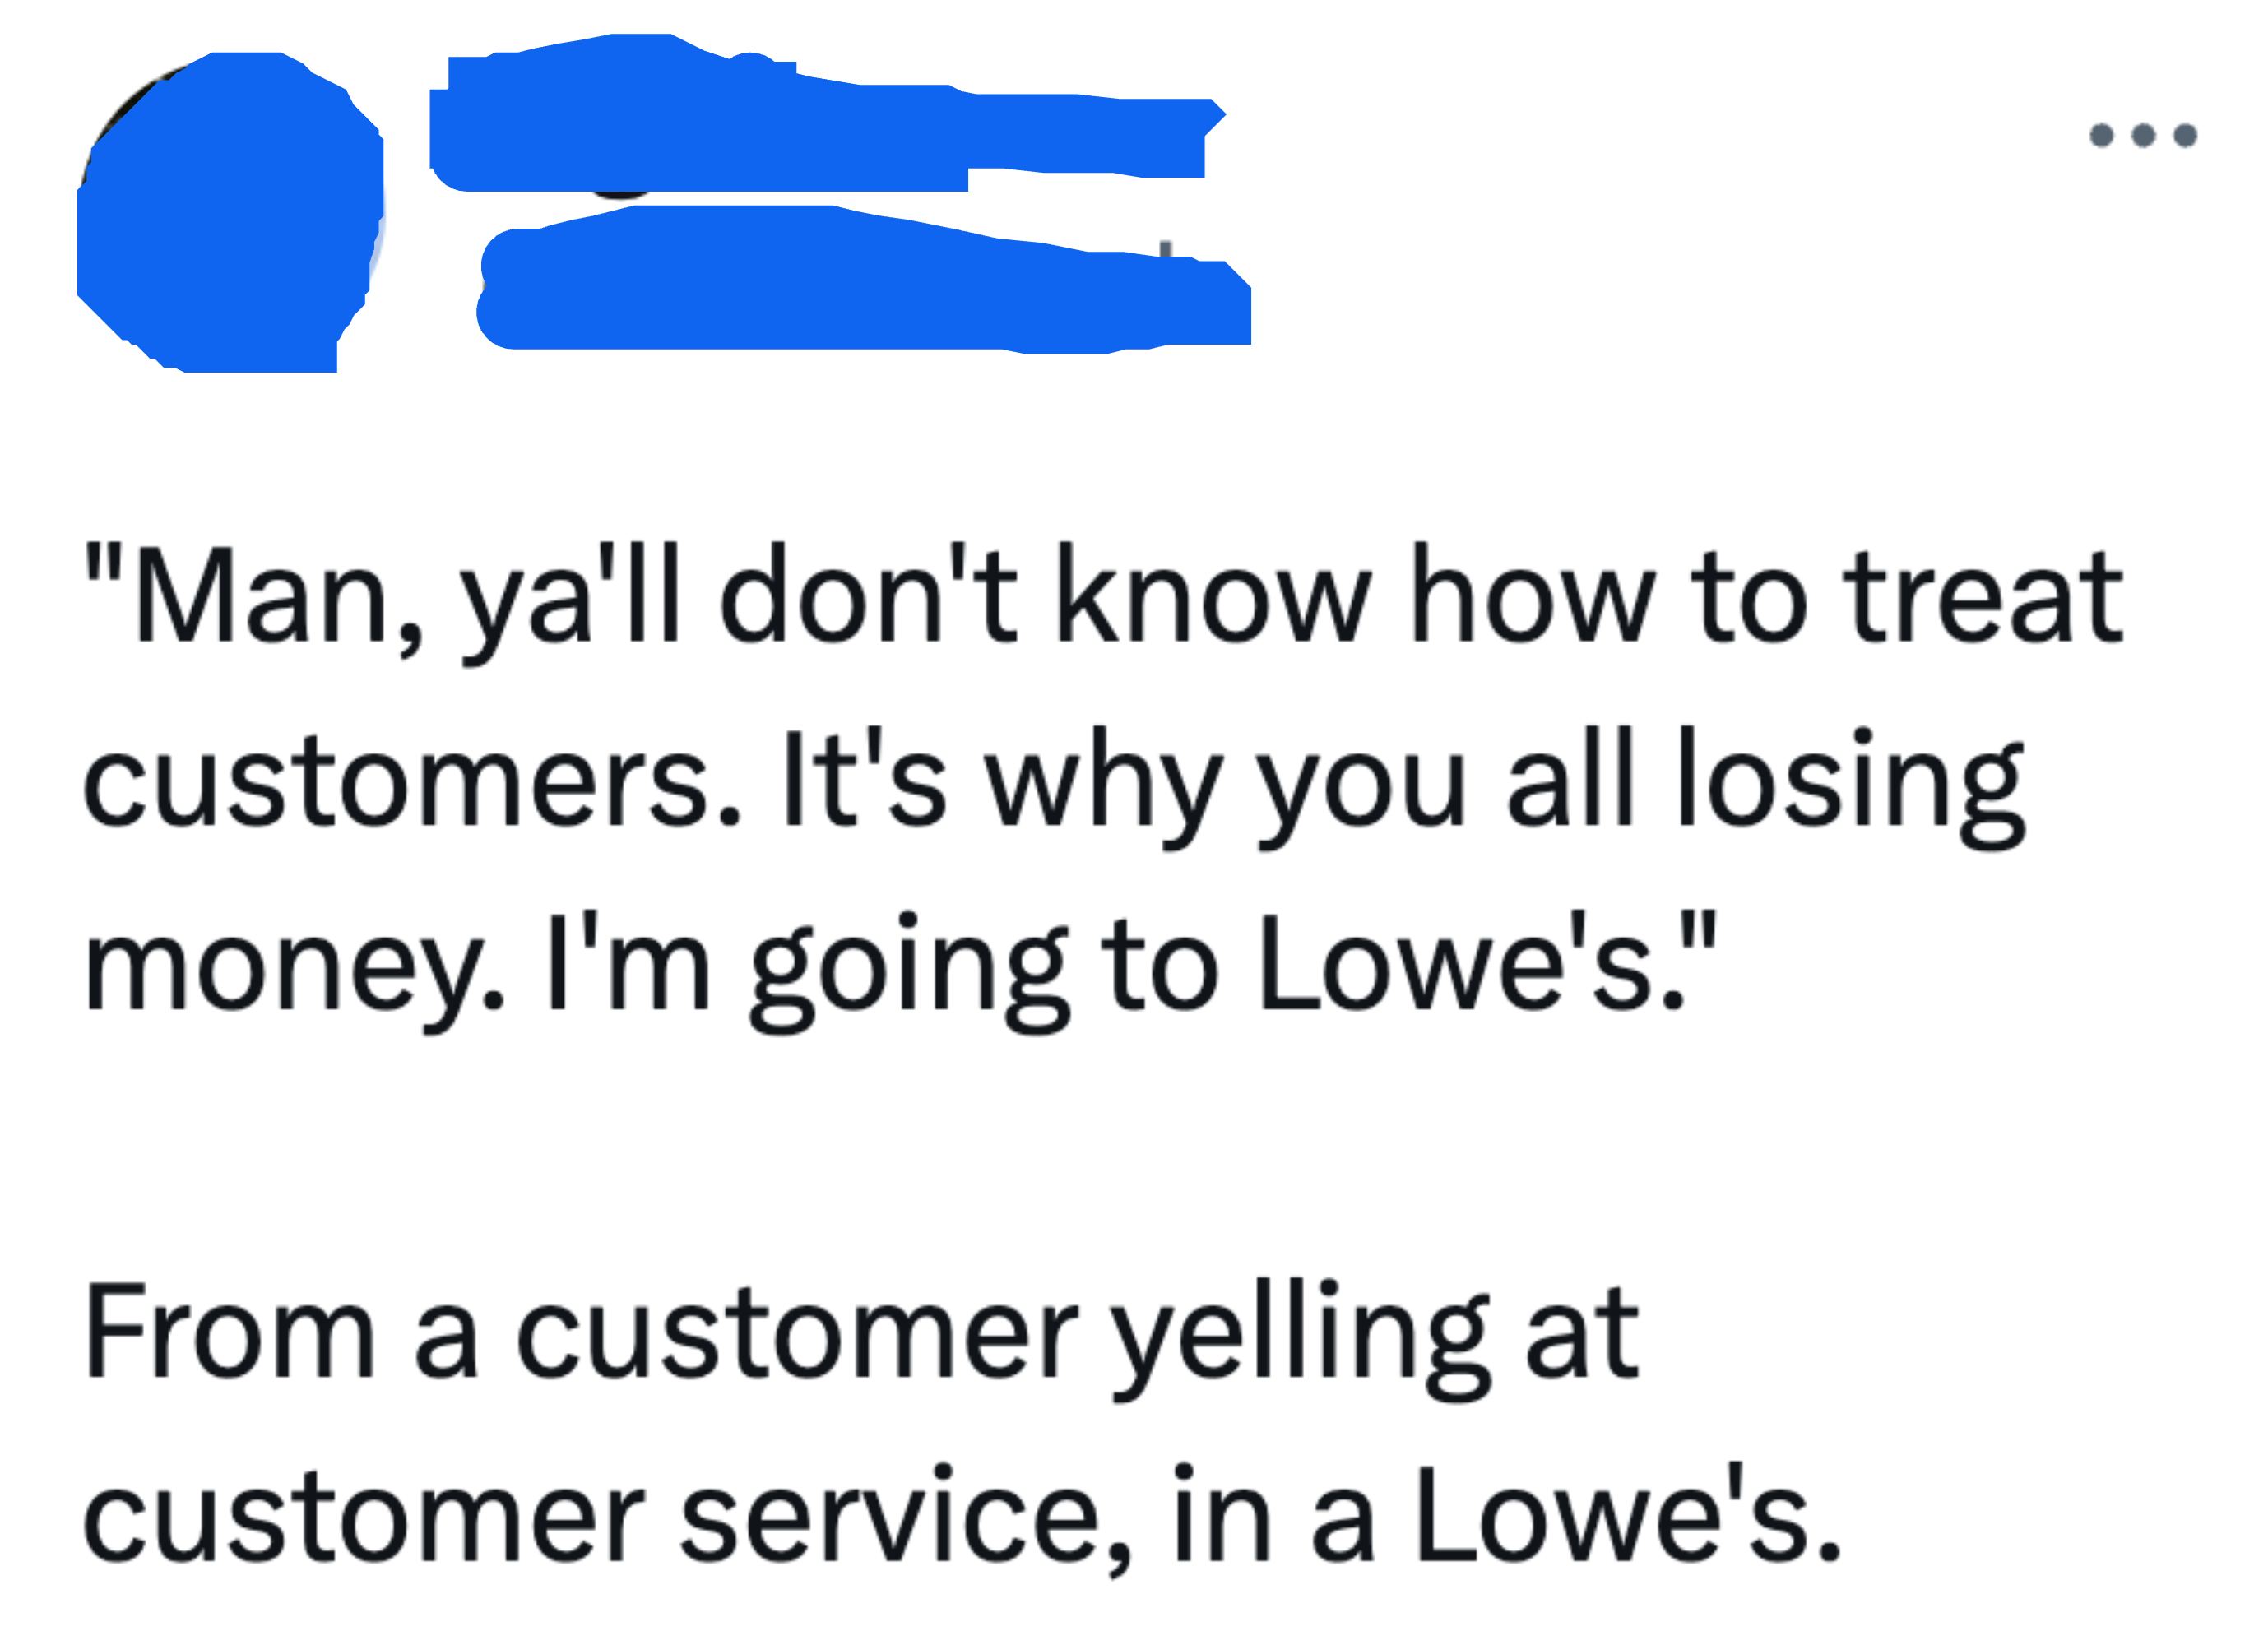 &quot;Man, y&#x27;all don&#x27;t know how to treat customers.&quot;